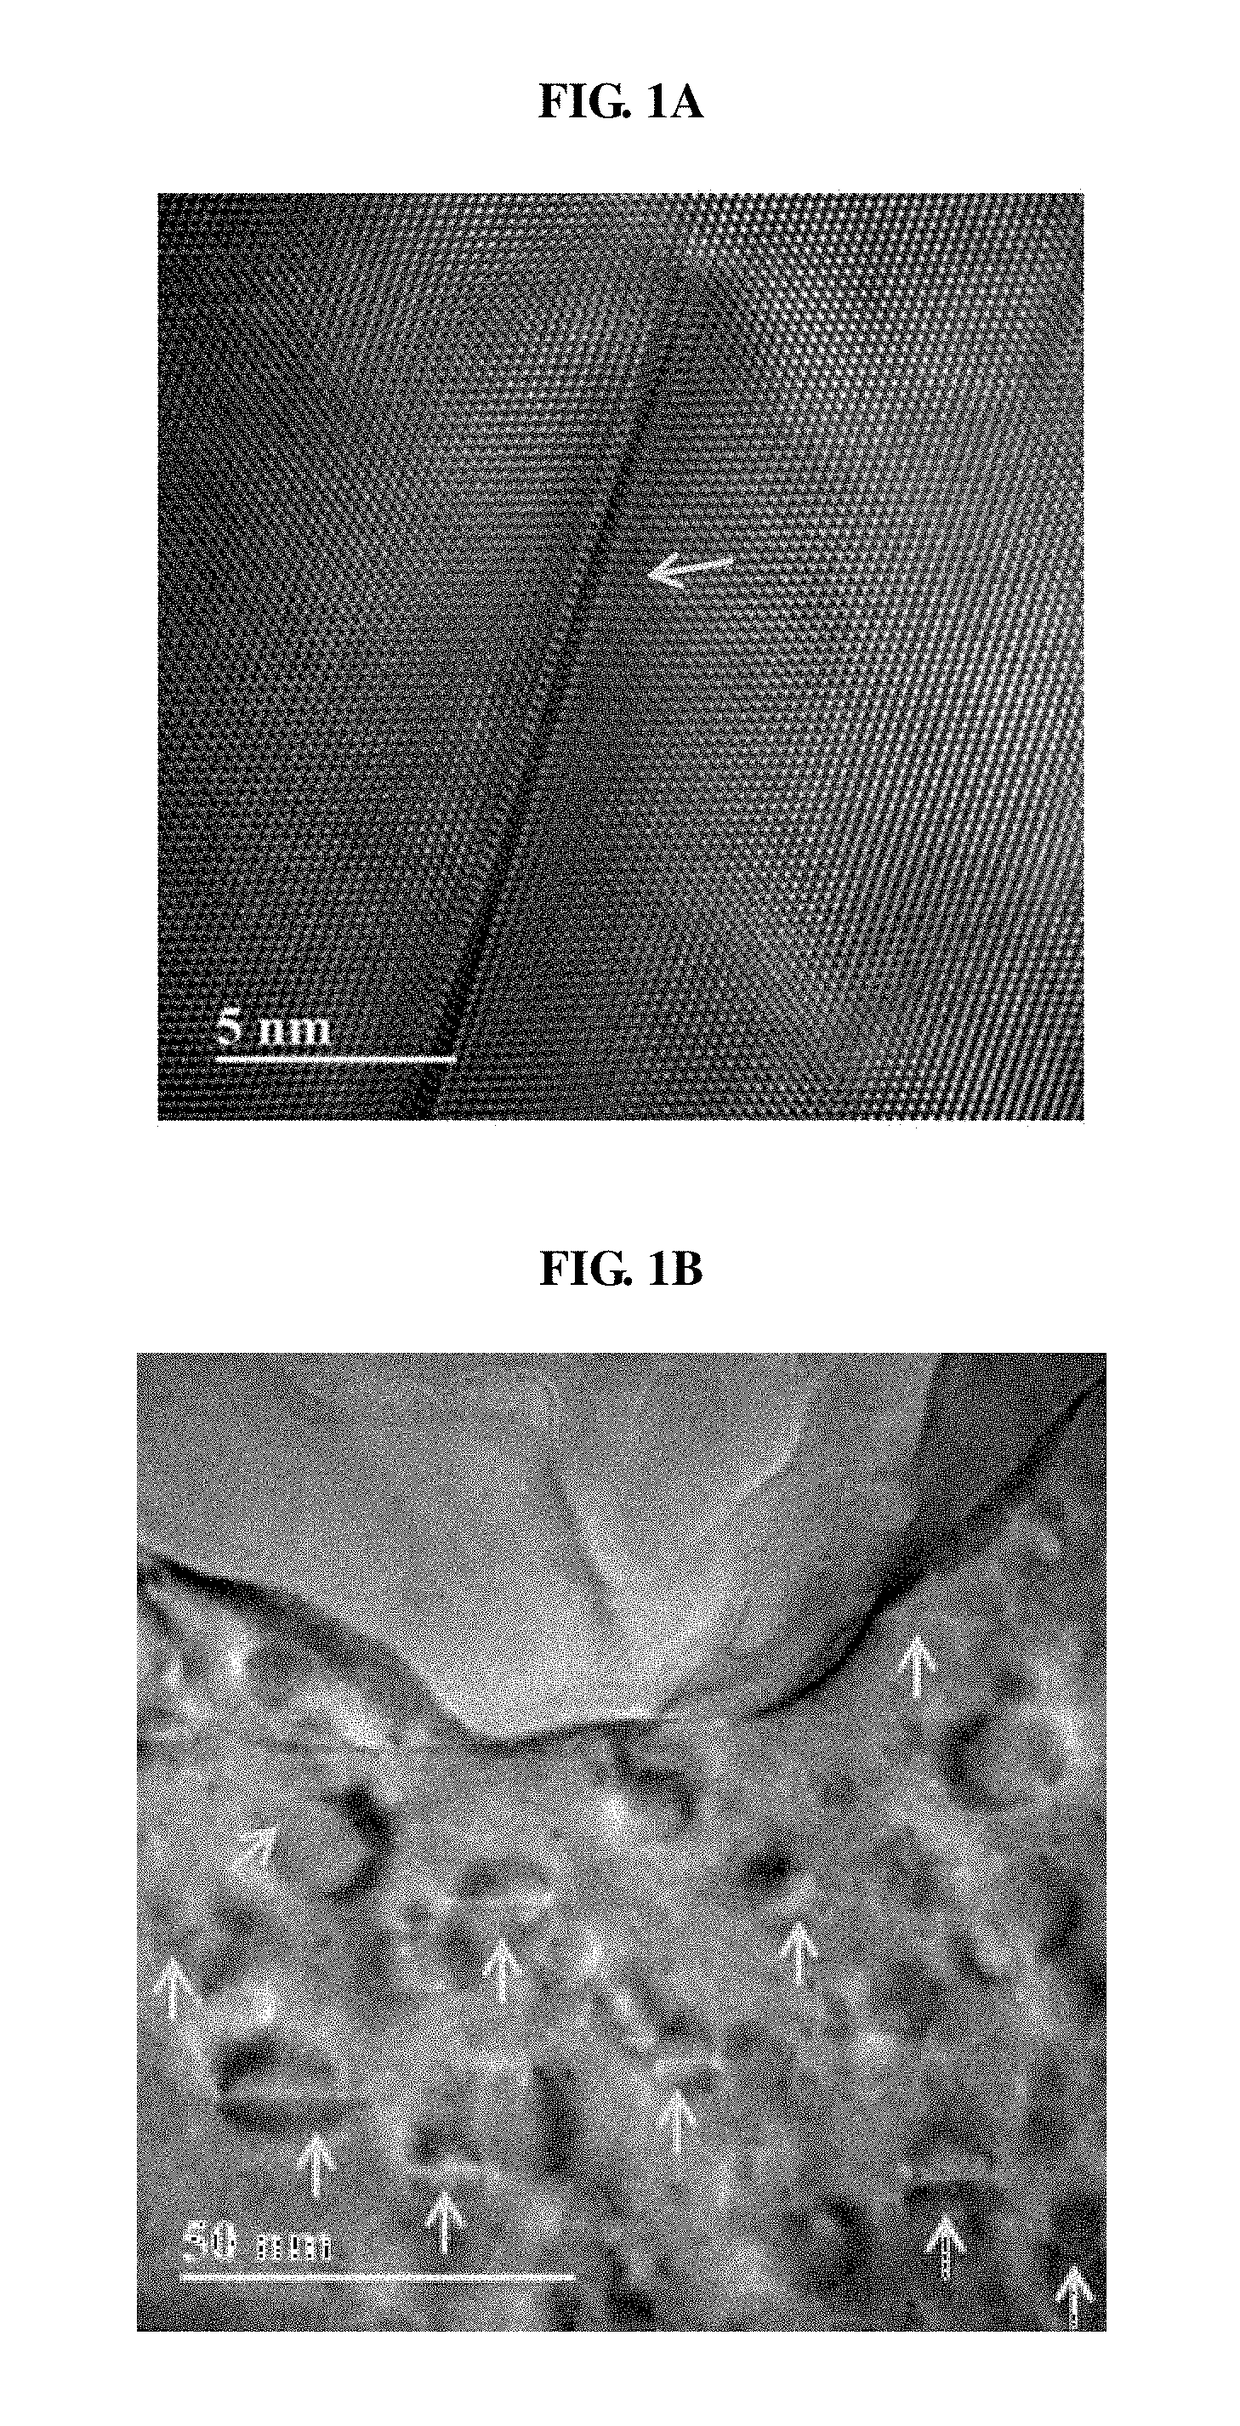 Engineered aluminum alloy and method of fabricating the same